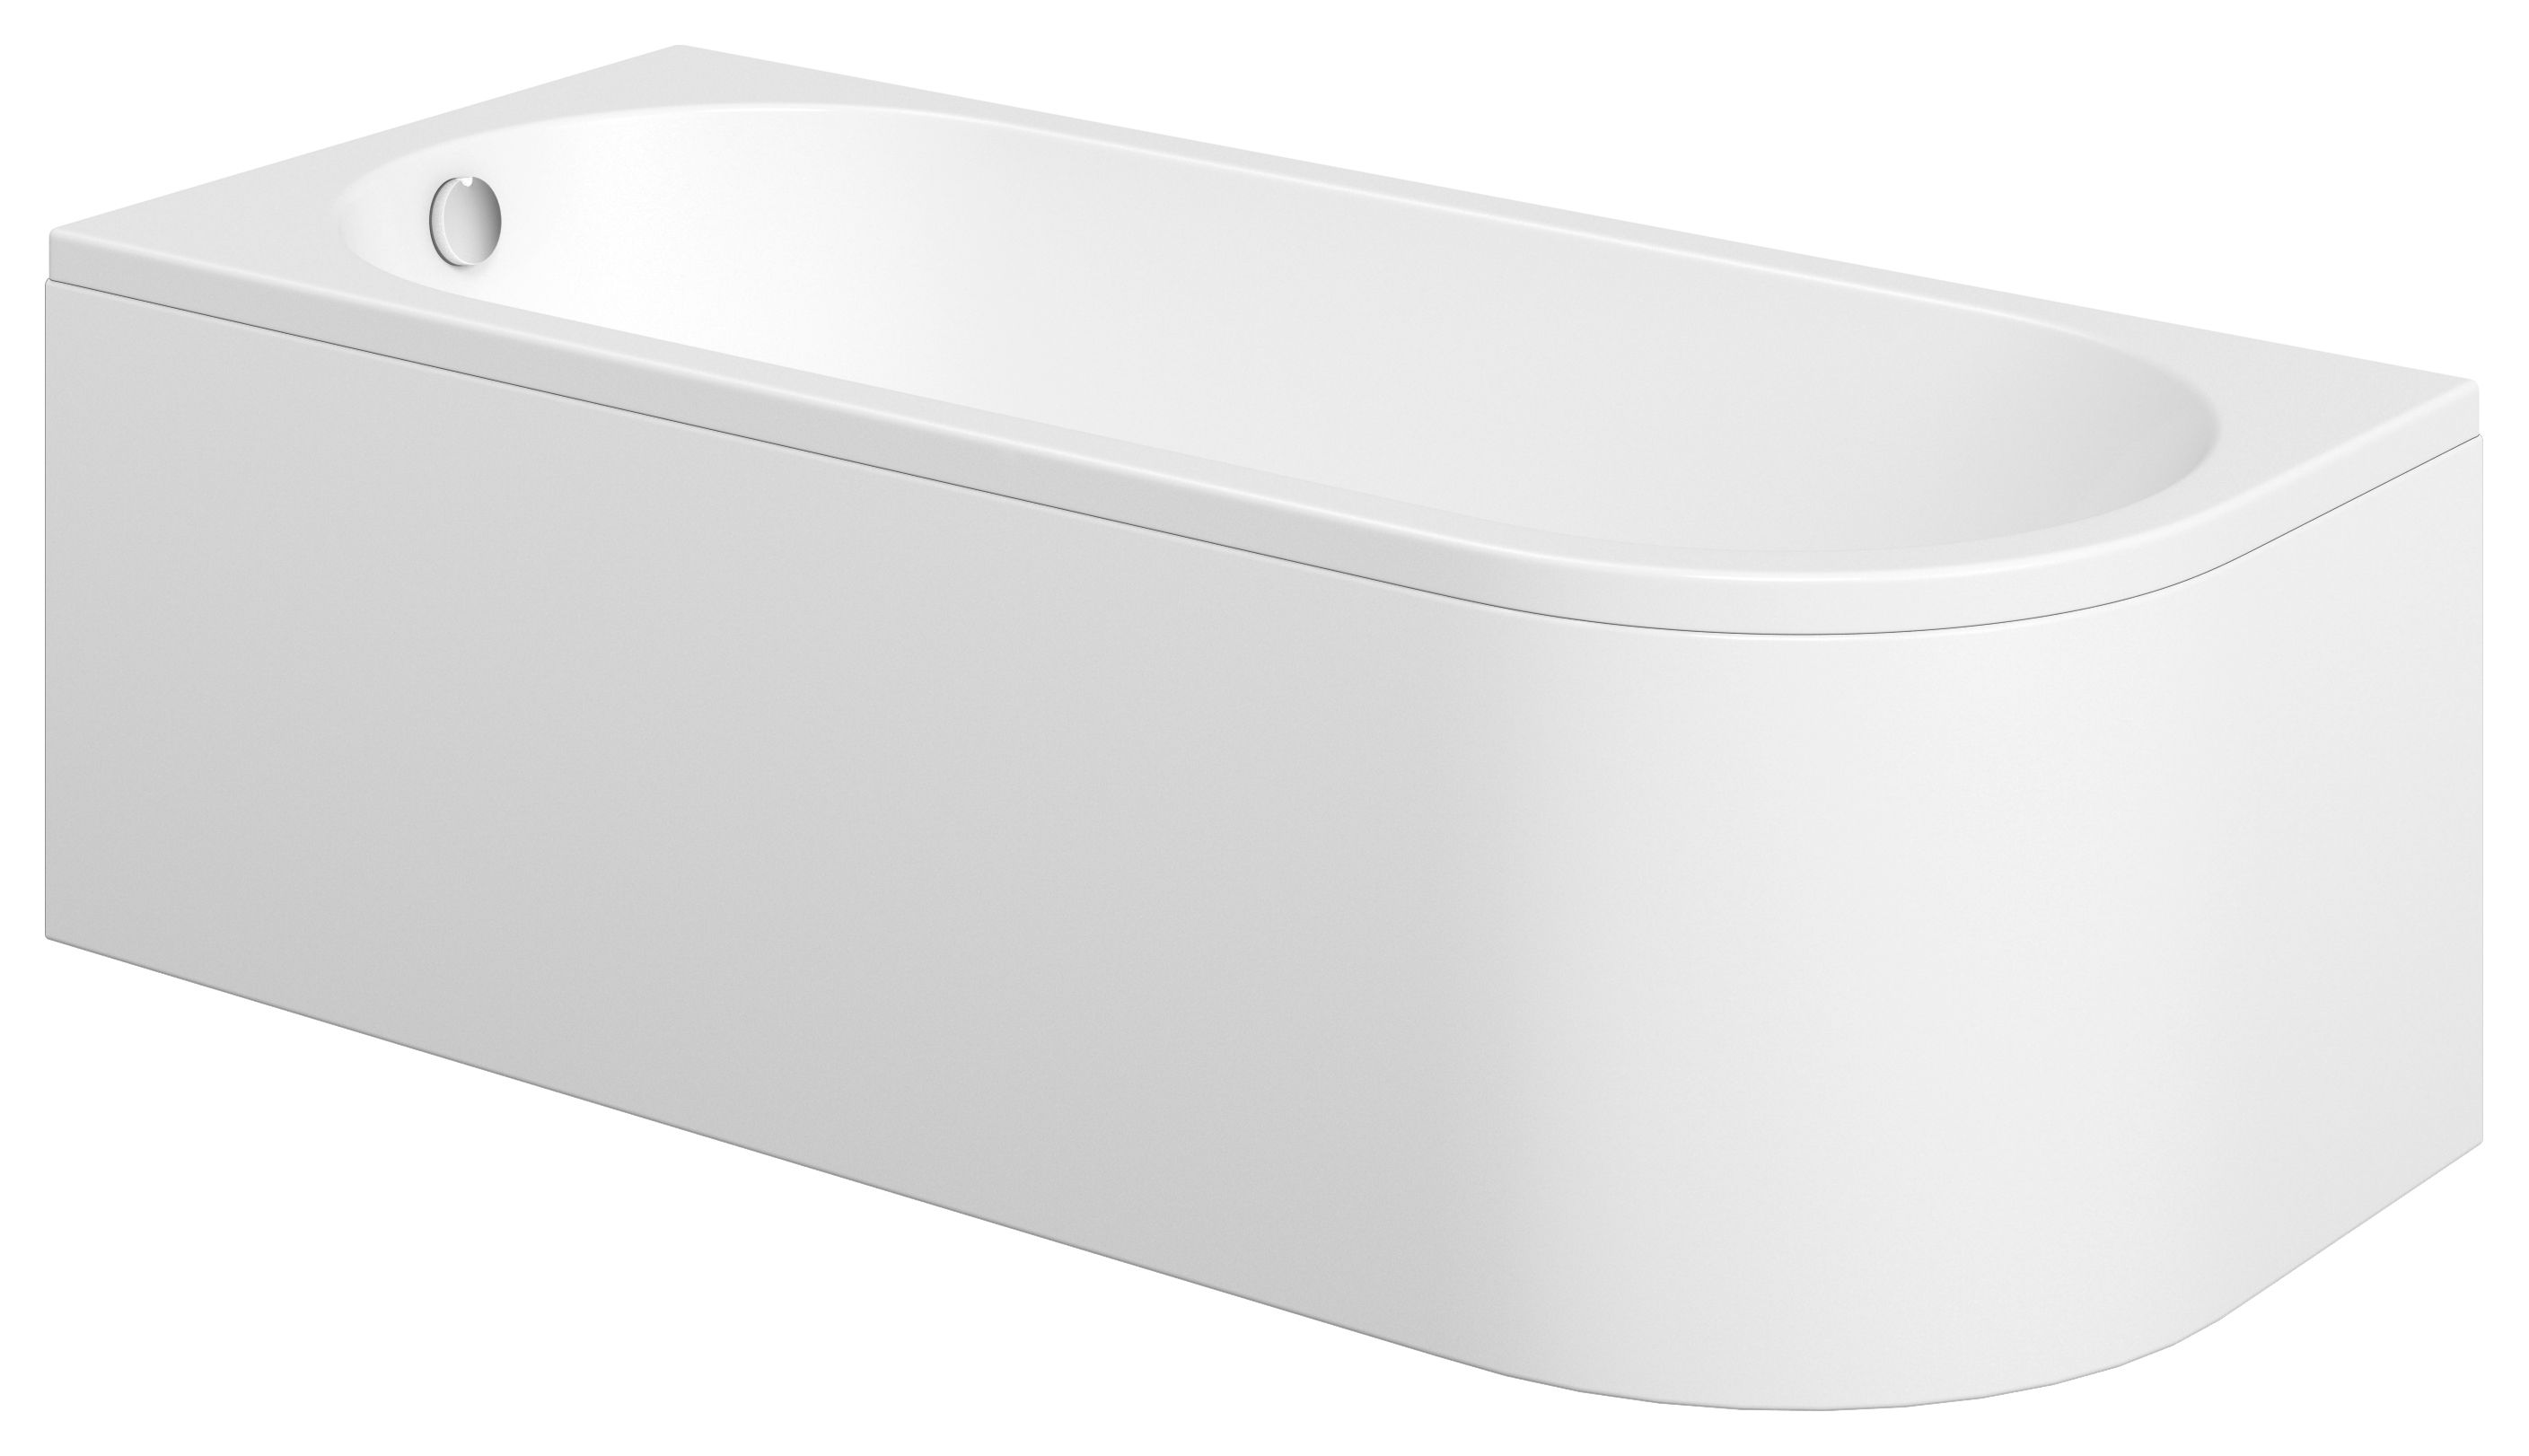 Image of Wickes Ellipse Reversible Front Bath Panel - 1700 x 510mm